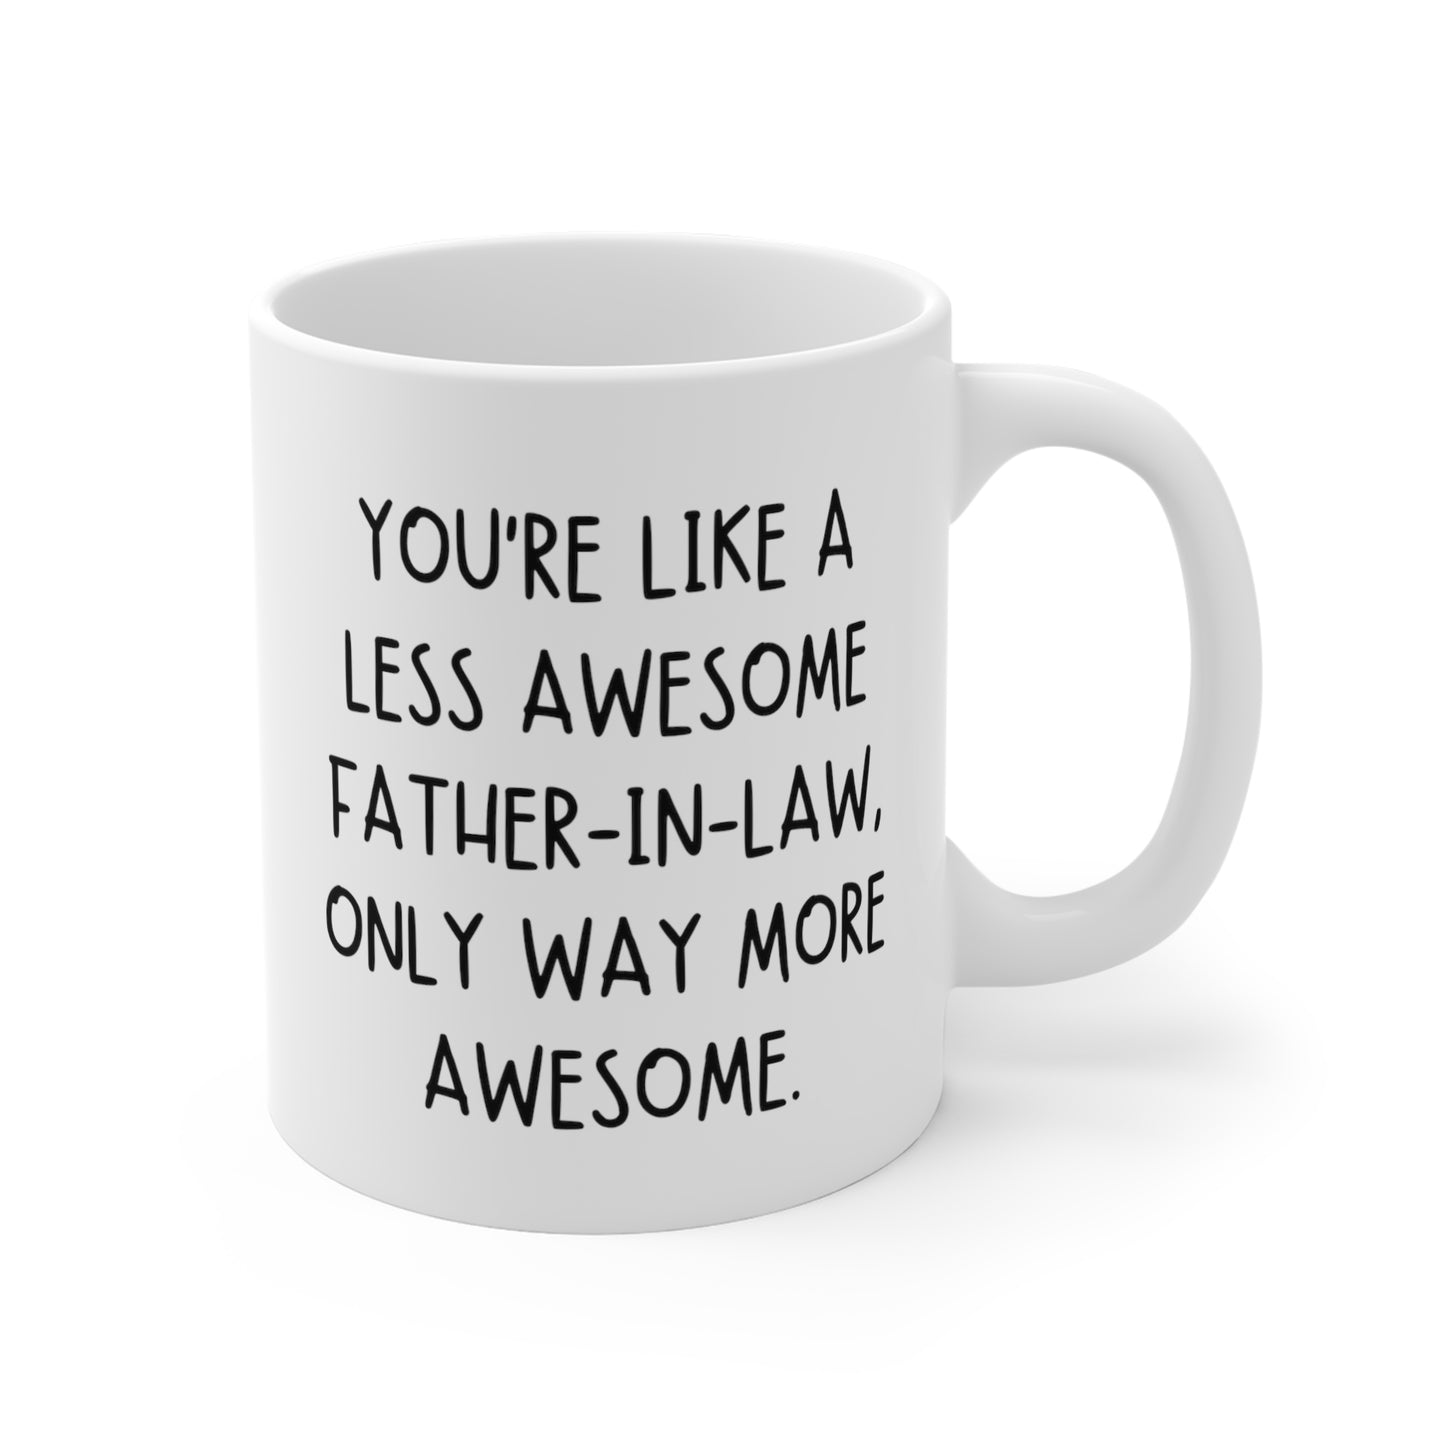 You're Like A Less Awesome Father-In-Law, Only Way More Awesome | Funny, Snarky Gift | White Ceramic Mug, Fun Block Font